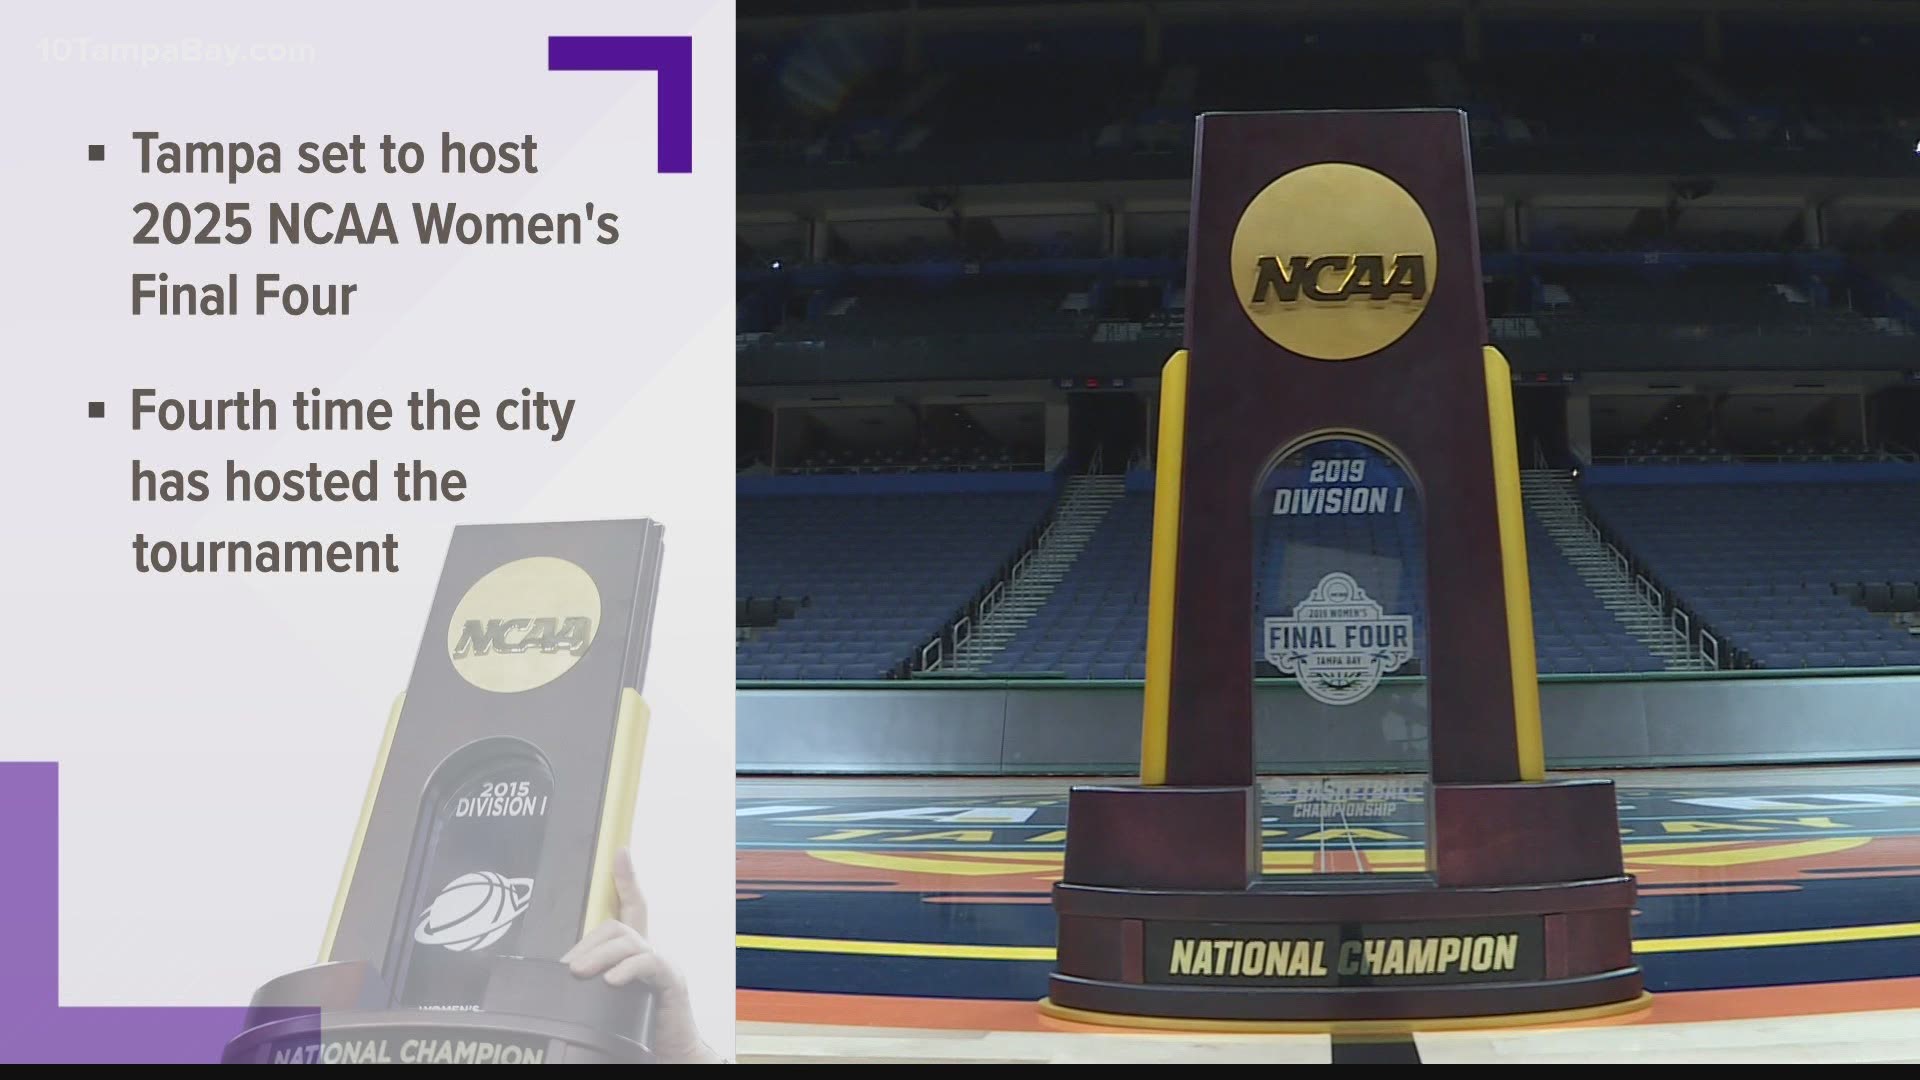 The NCAA Division I Women’s Basketball Committee says the NCAA Women’s Final Four will be at Amalie Arena in 2025.